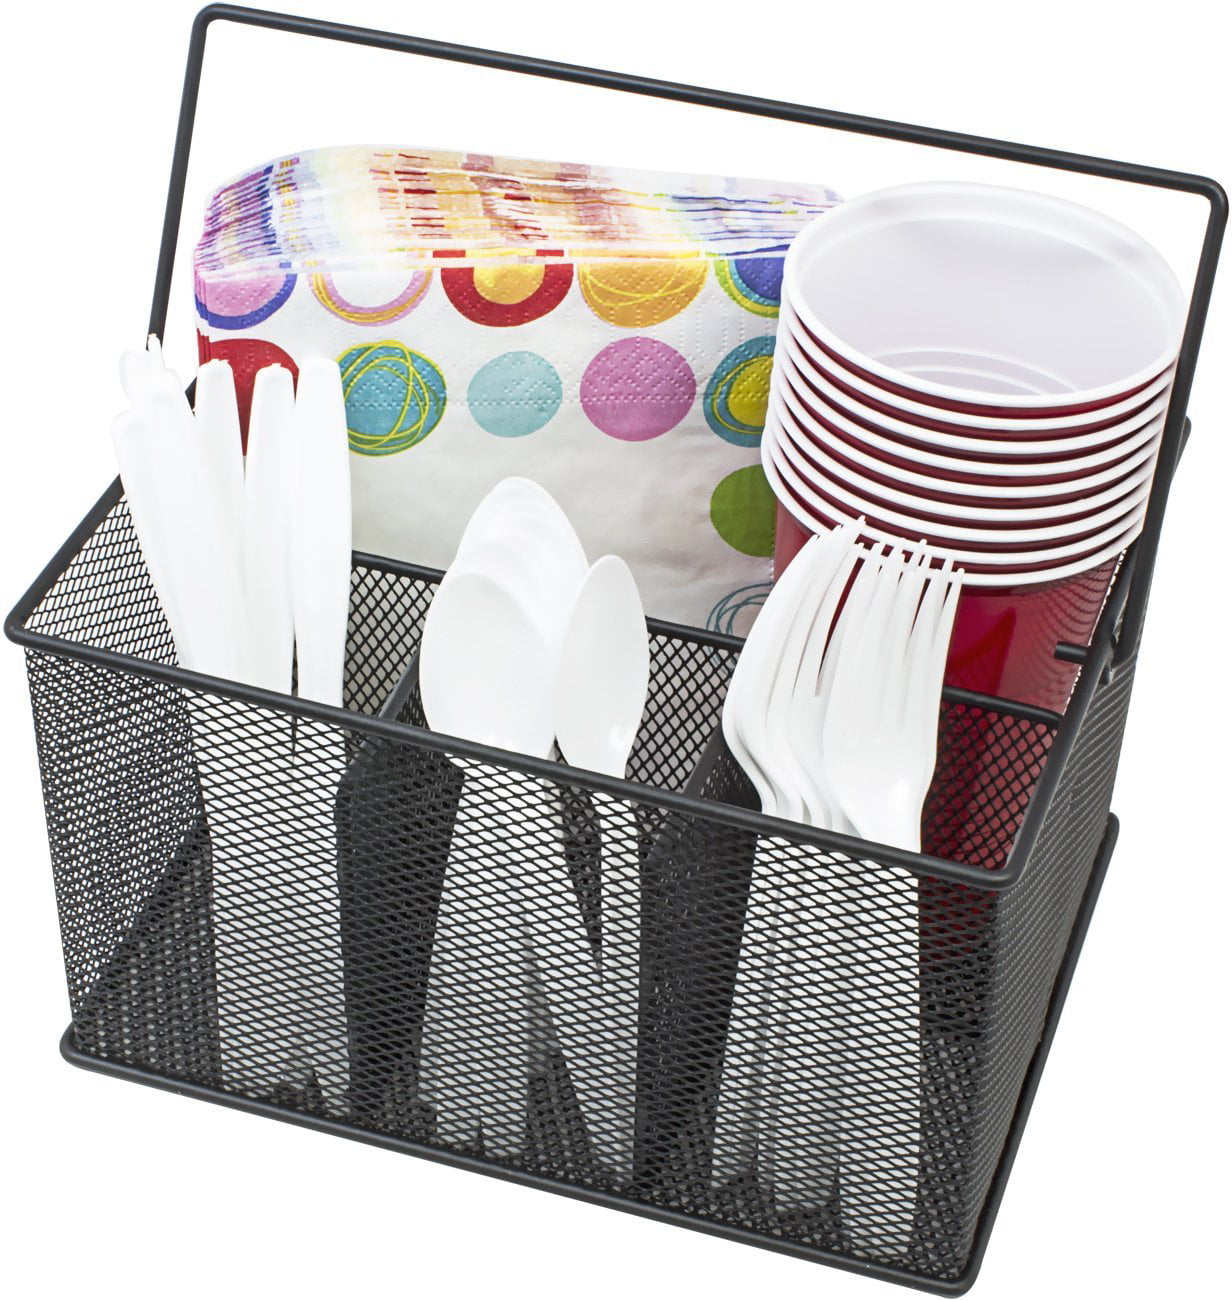 ESYLIFE 4 Compartments Silverware Caddy Organizer with Handle Ideal for Napkin and Condiment 